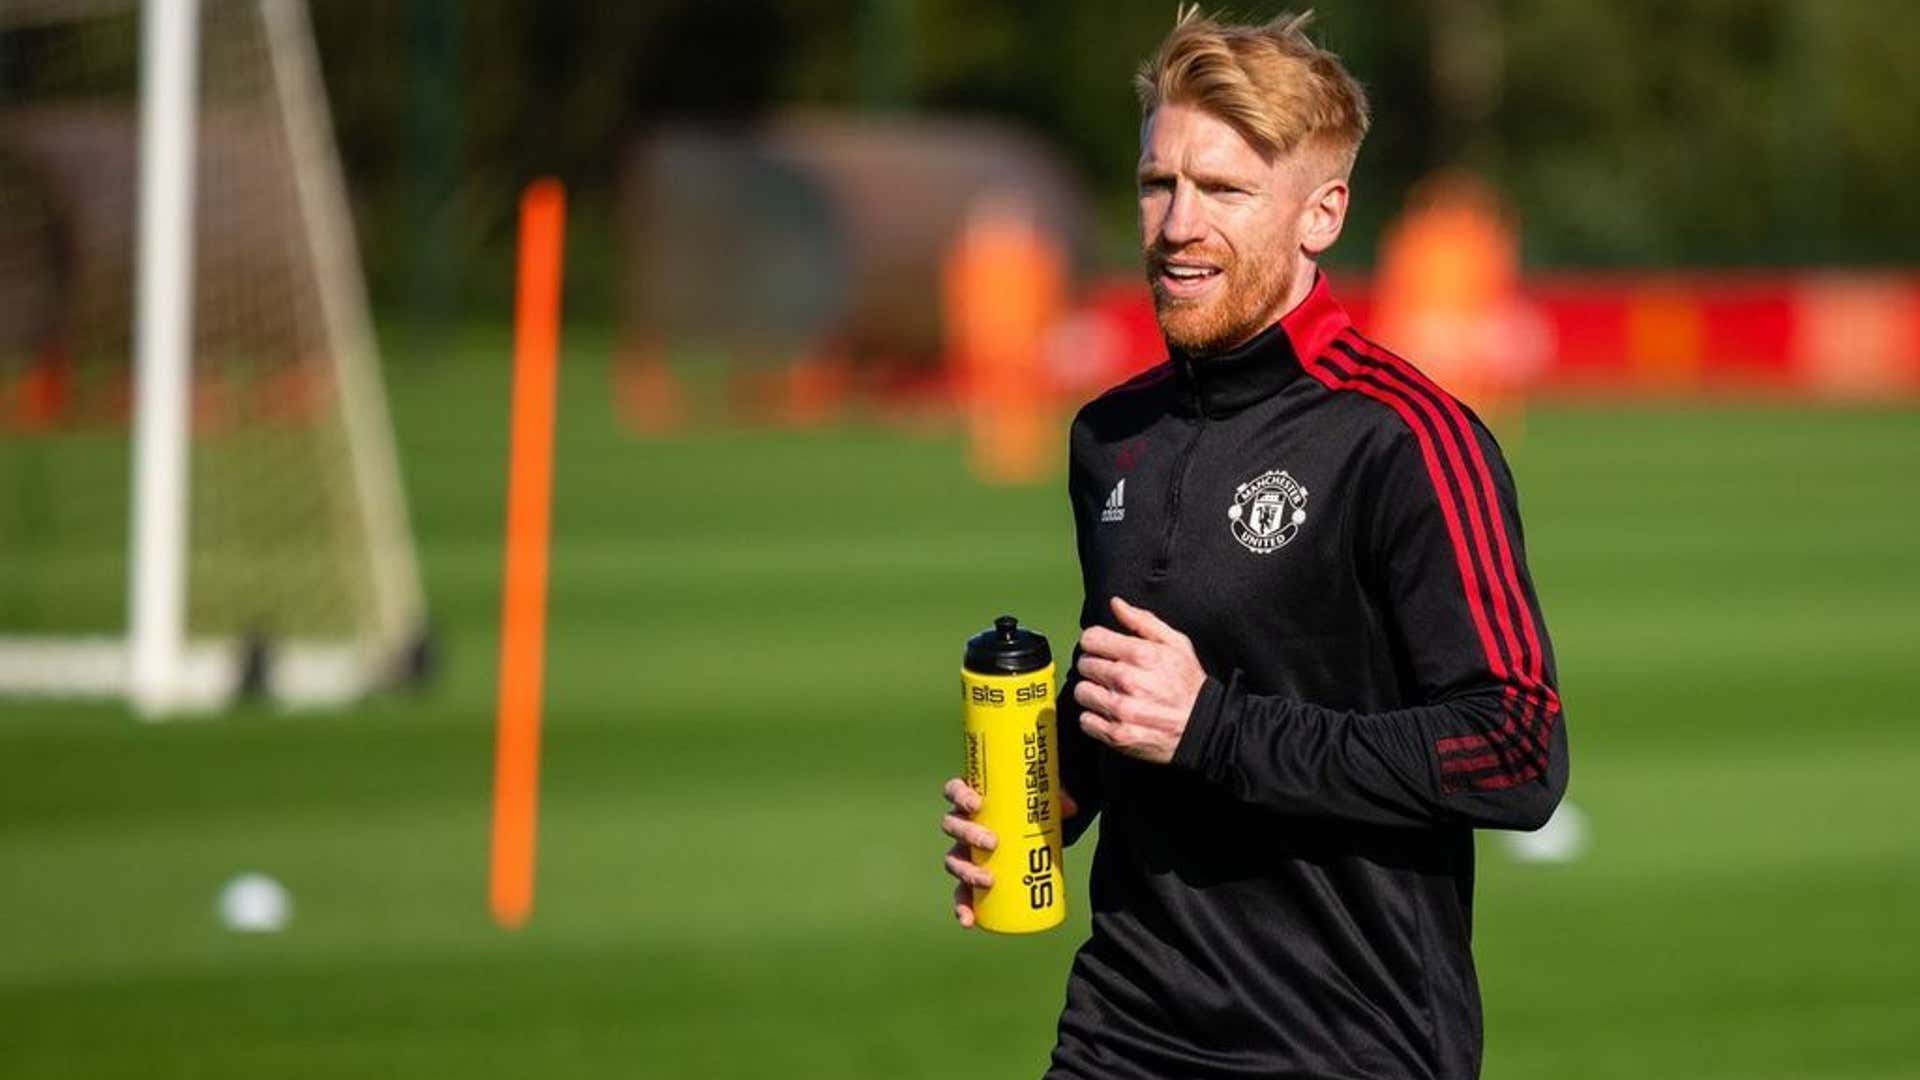 'It was a no-brainer' - Why is 35-year-old journeyman Paul McShane playing for Man Utd Under-23s?